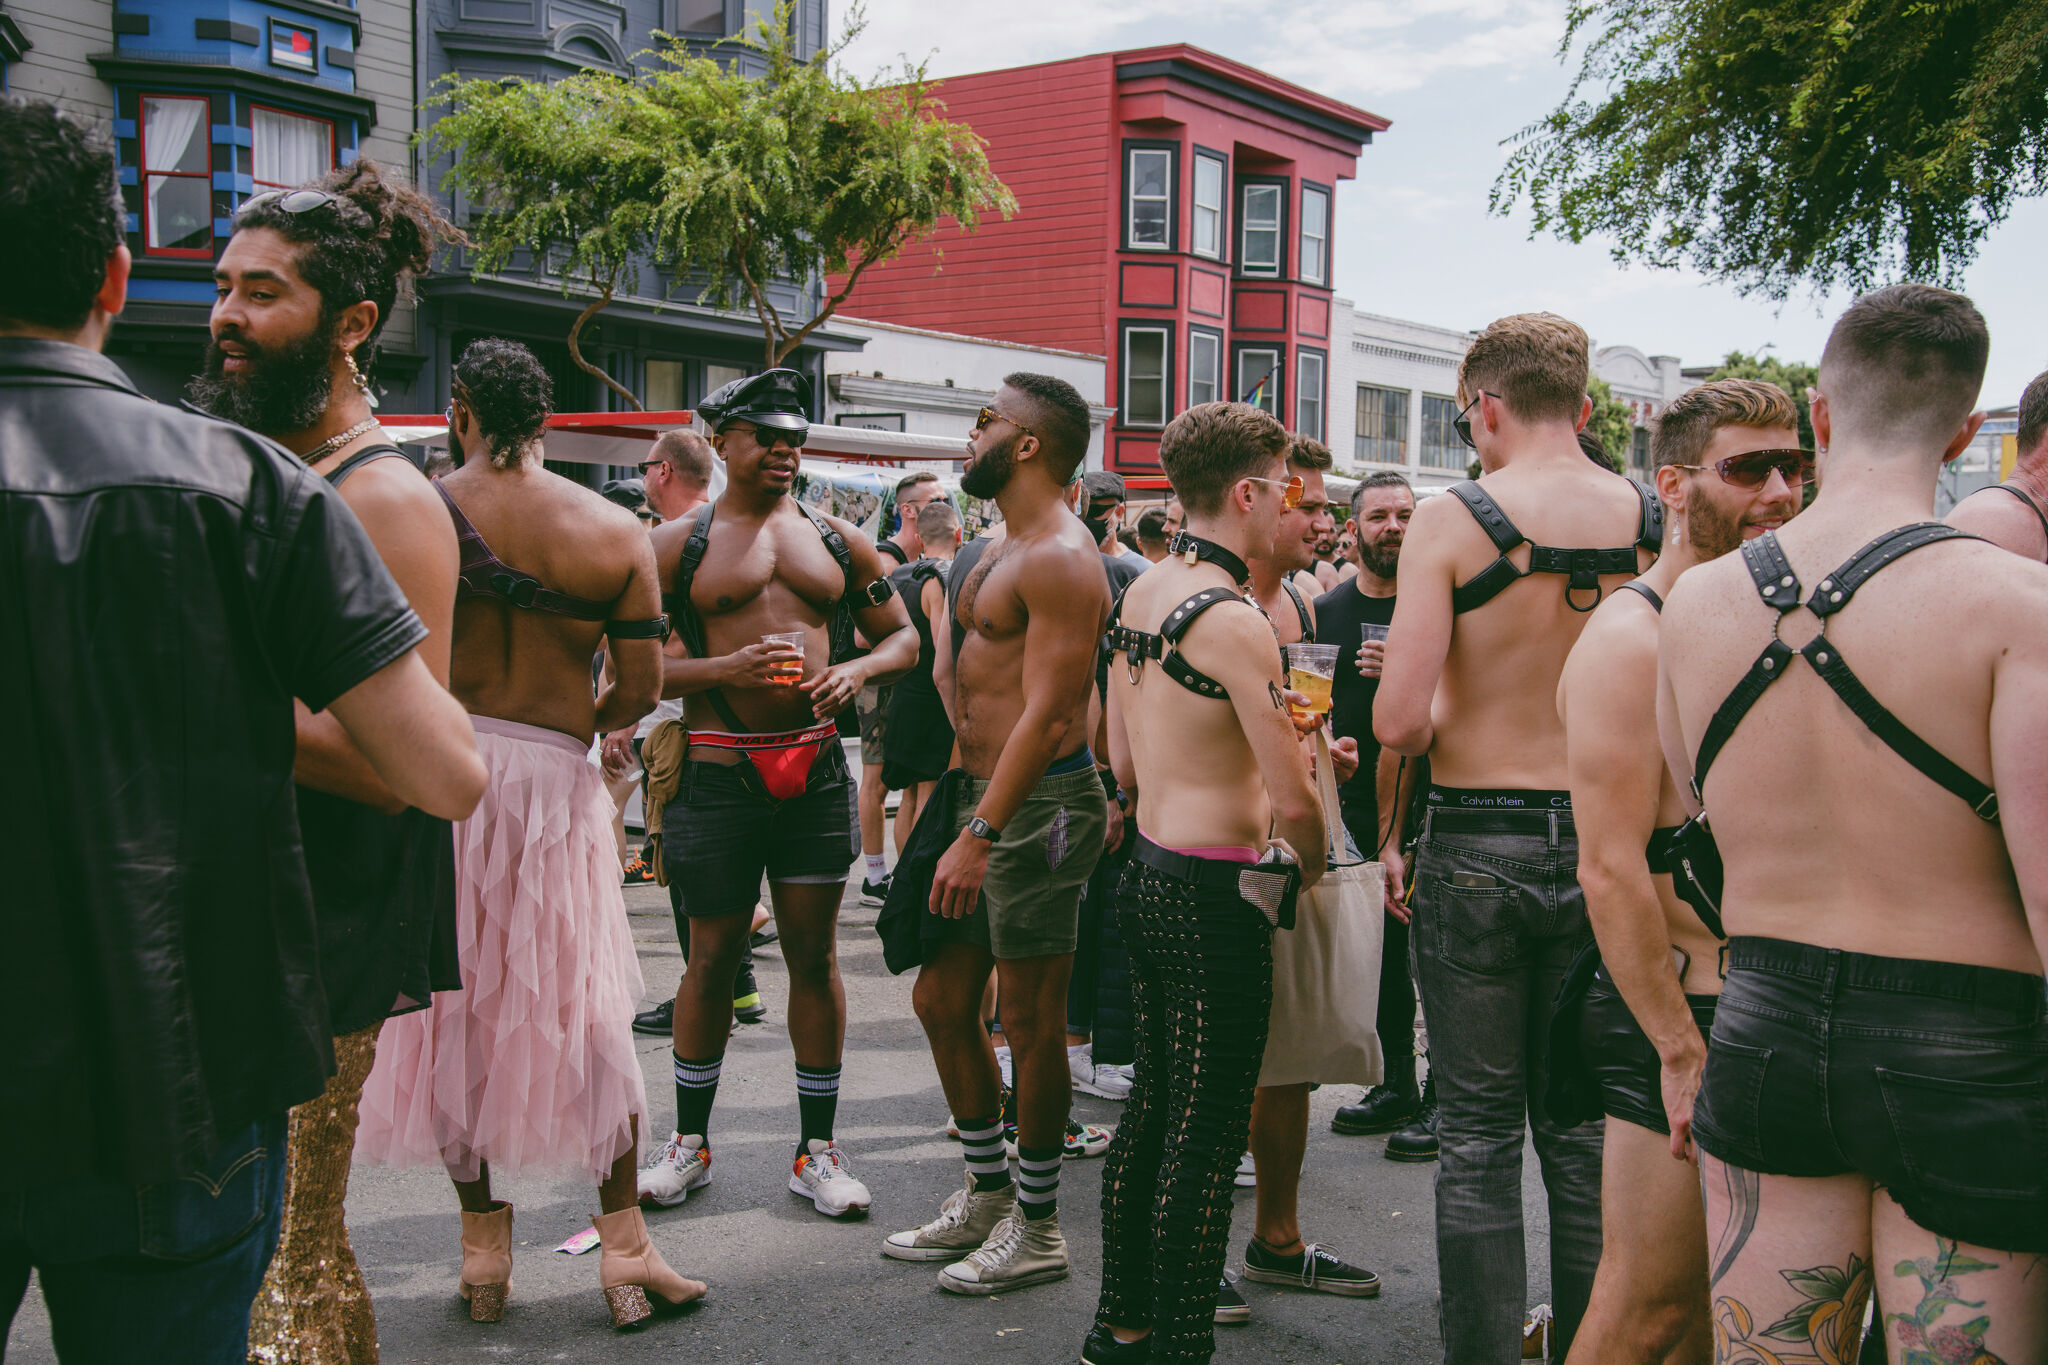 San Francisco's Dore Alley returns this weekend